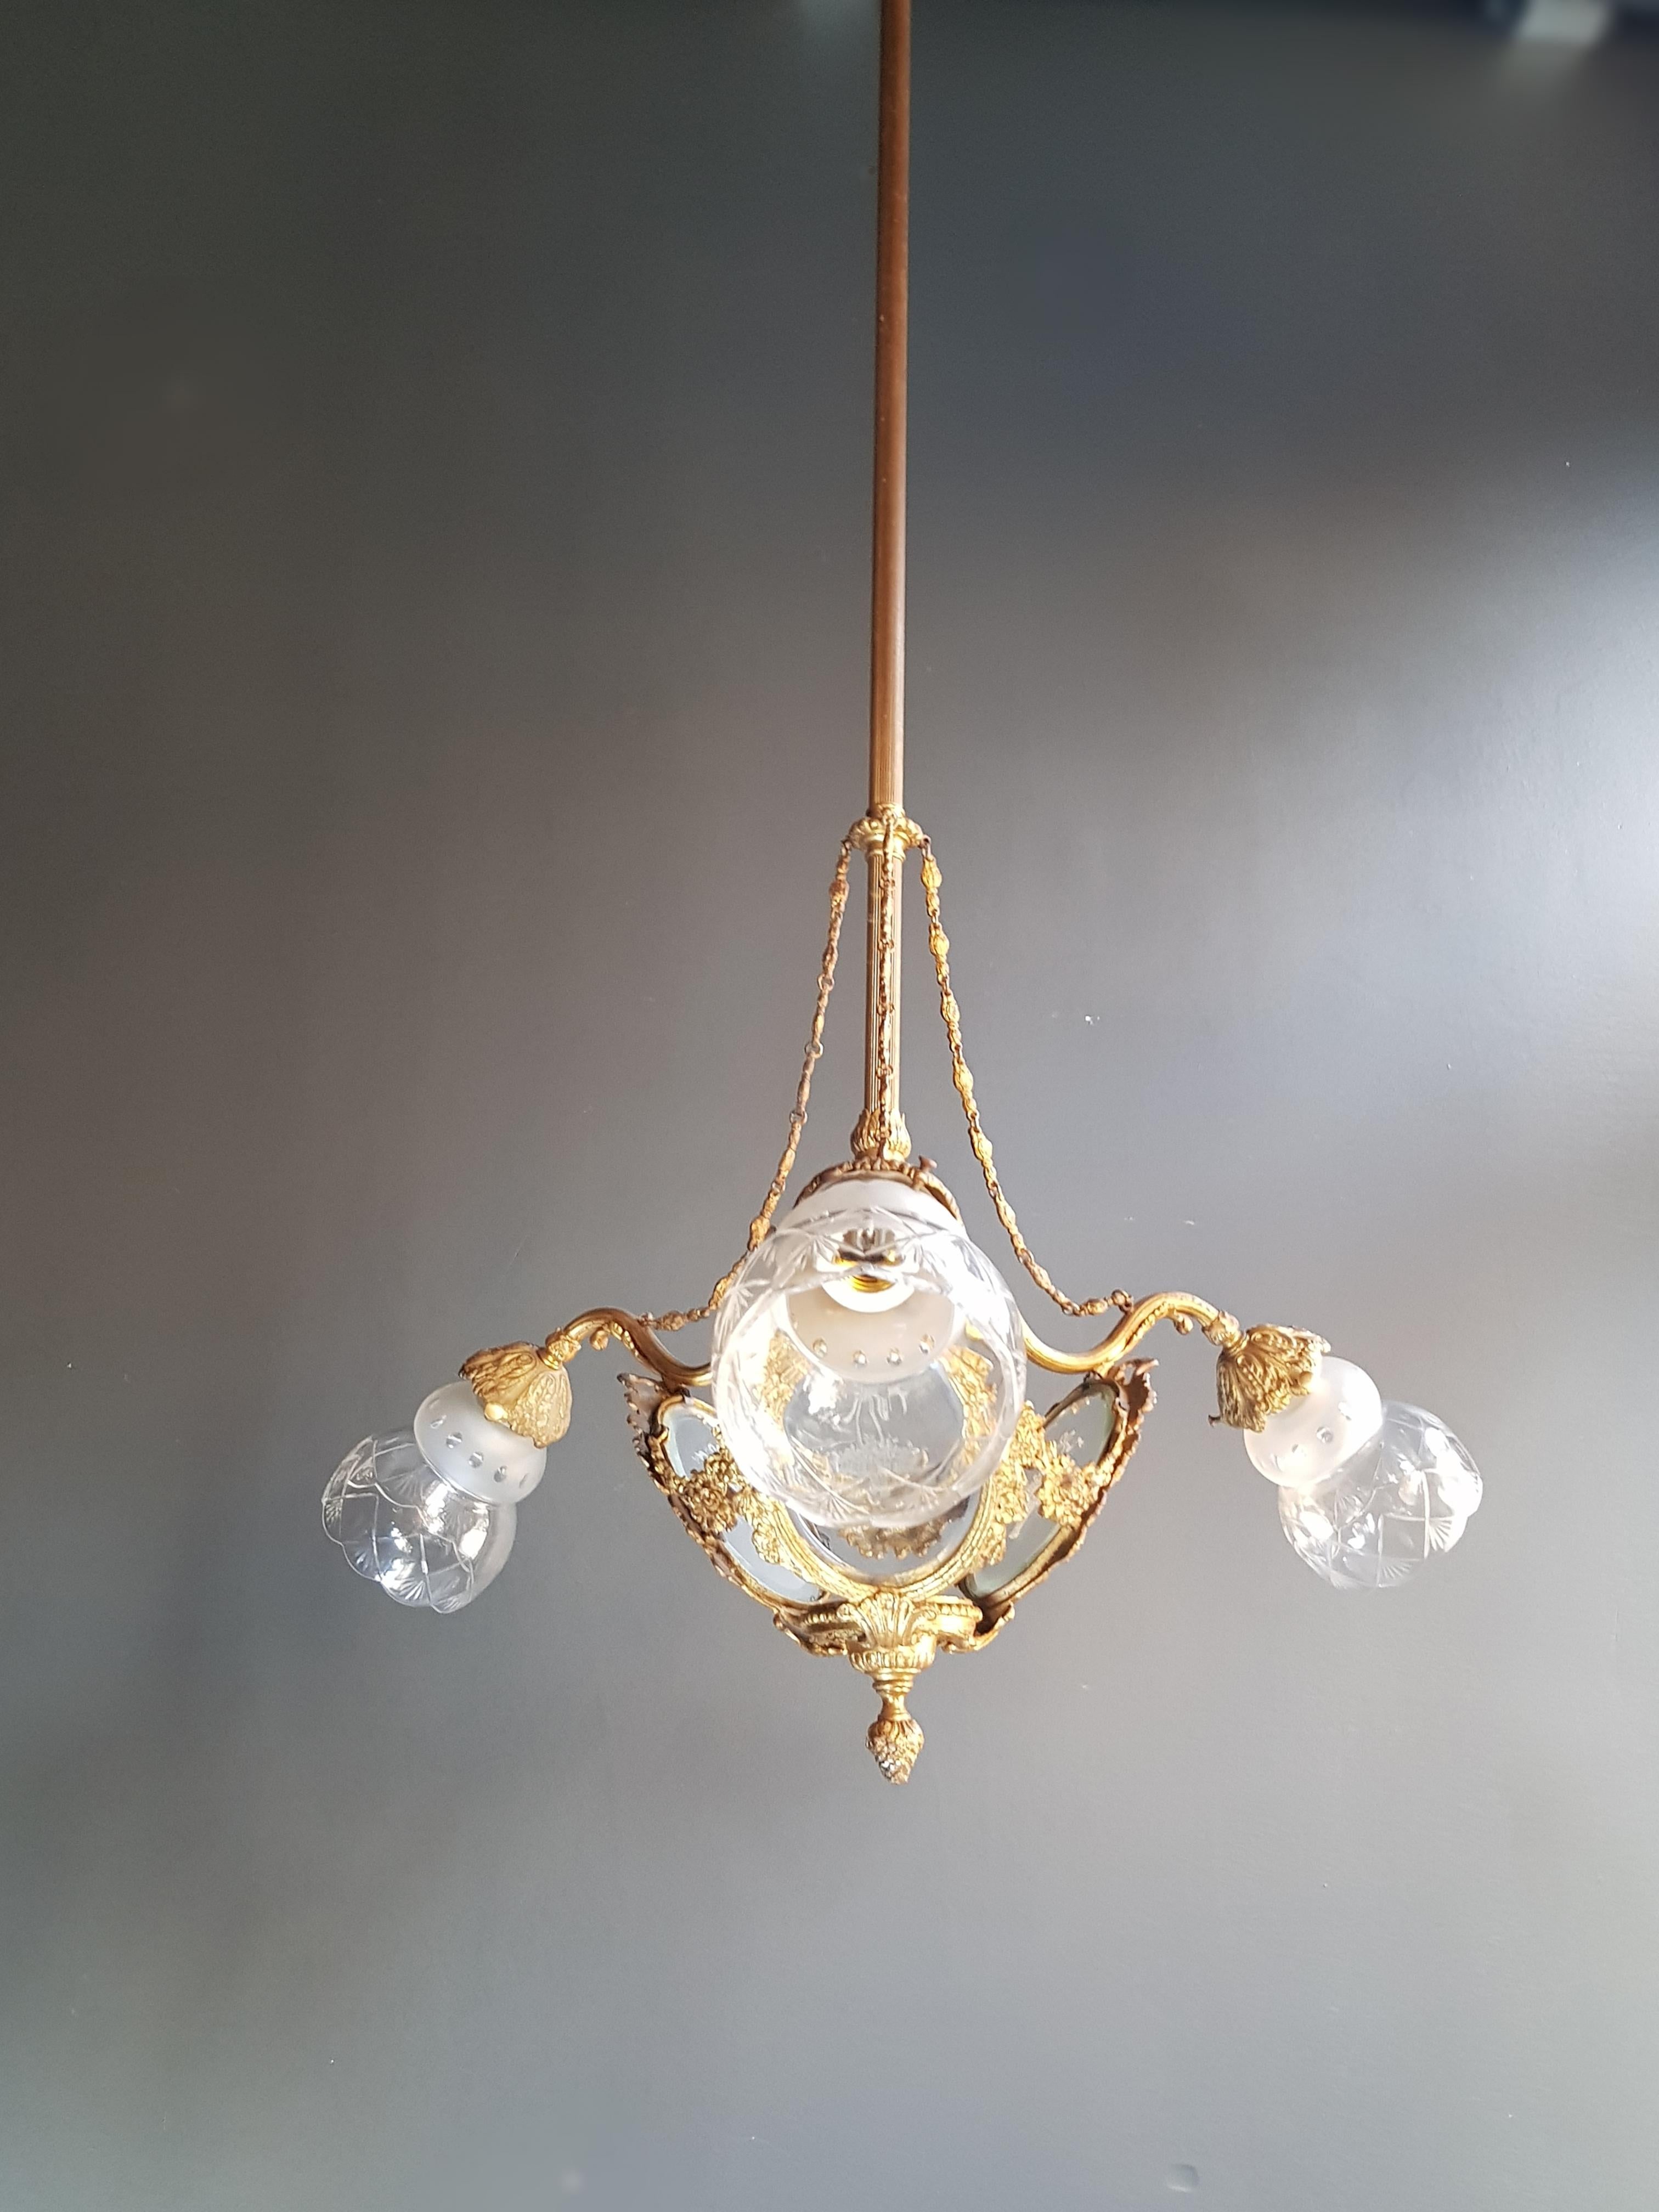 **Rare Art Nouveau Brass Chandelier - A Distinctly Elegant Ceiling Lamp**

Presenting a rare gem: an Art Nouveau brass chandelier that exudes sophistication and rarity. This ceiling lamp stands as a remarkable testament to the beauty of its